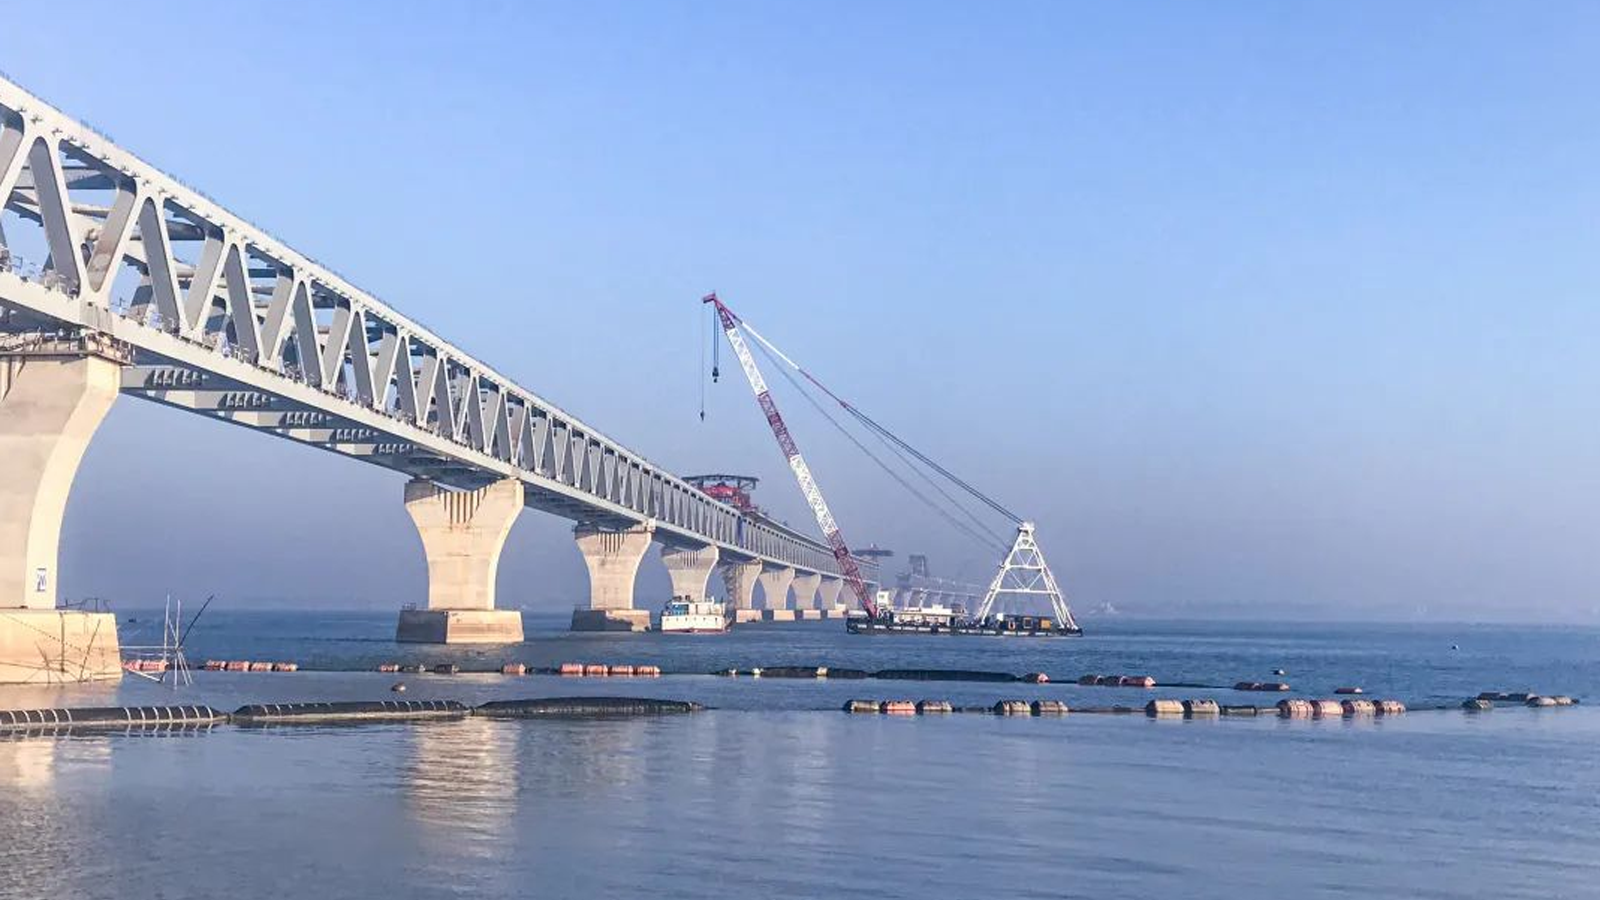  Building "Belt and Road", Qunfeng Deeply Recognized by Bangladeshi Customers